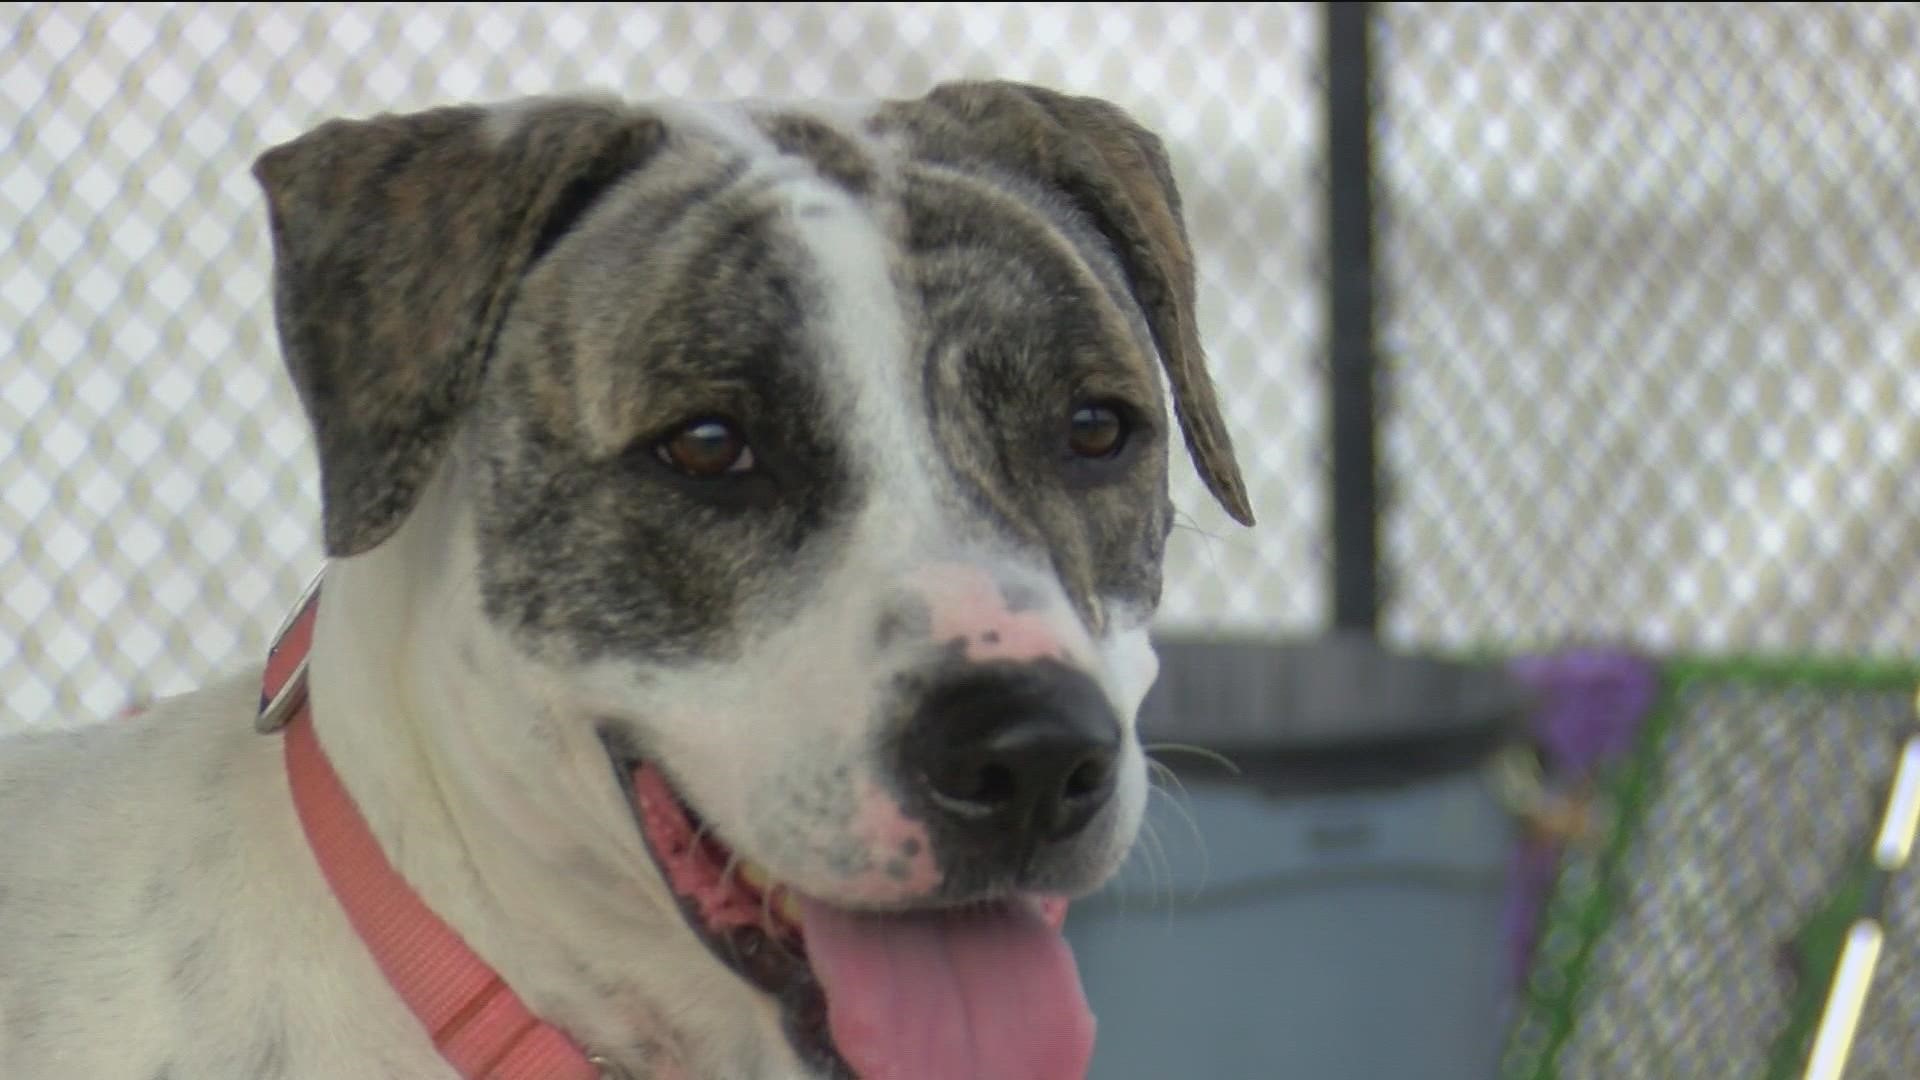 The Toledo rescue group is helping several dogs rescued from Florida to find new homes in Ohio.